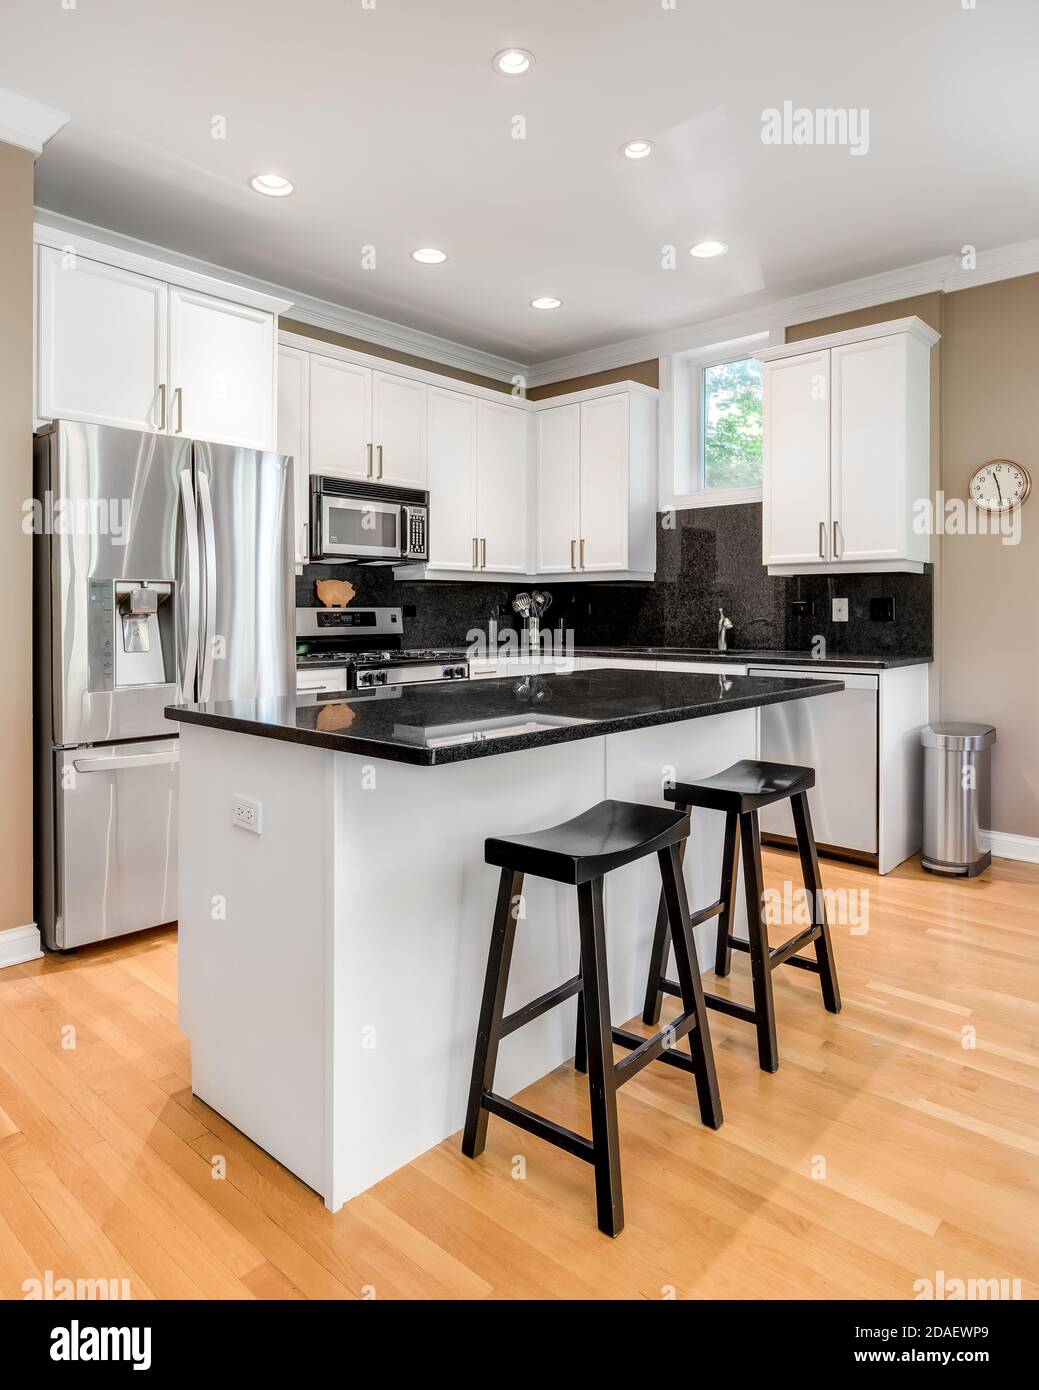 A white kitchen with a black granite counter top and back splash, stainless steel appliances, and hardwood floors. Stock Photo